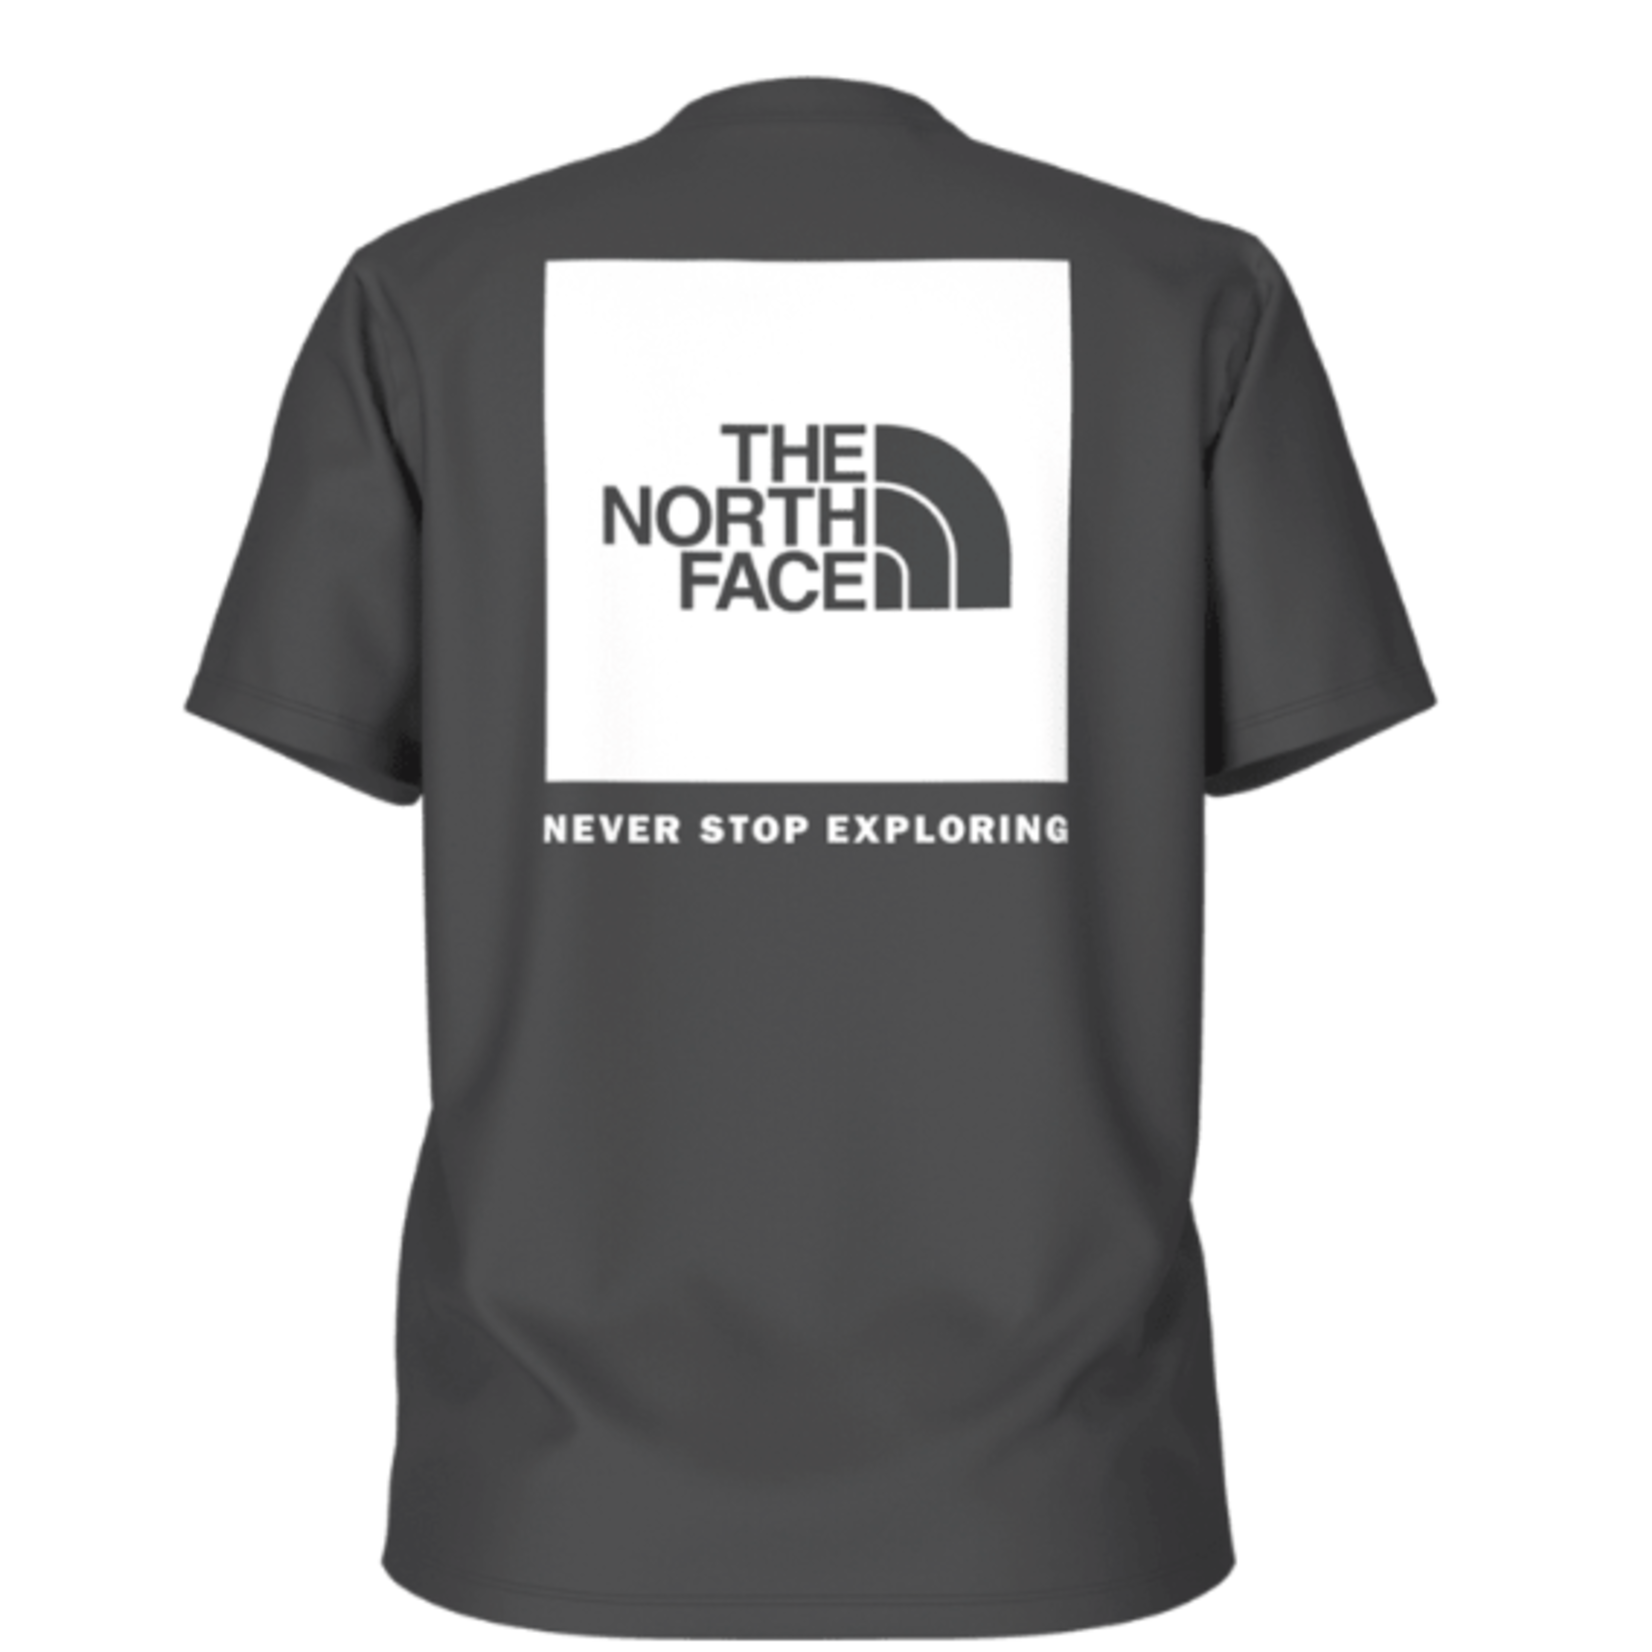 The North Face The North Face T-Shirt, S/S Box NSE Tee, Ladies